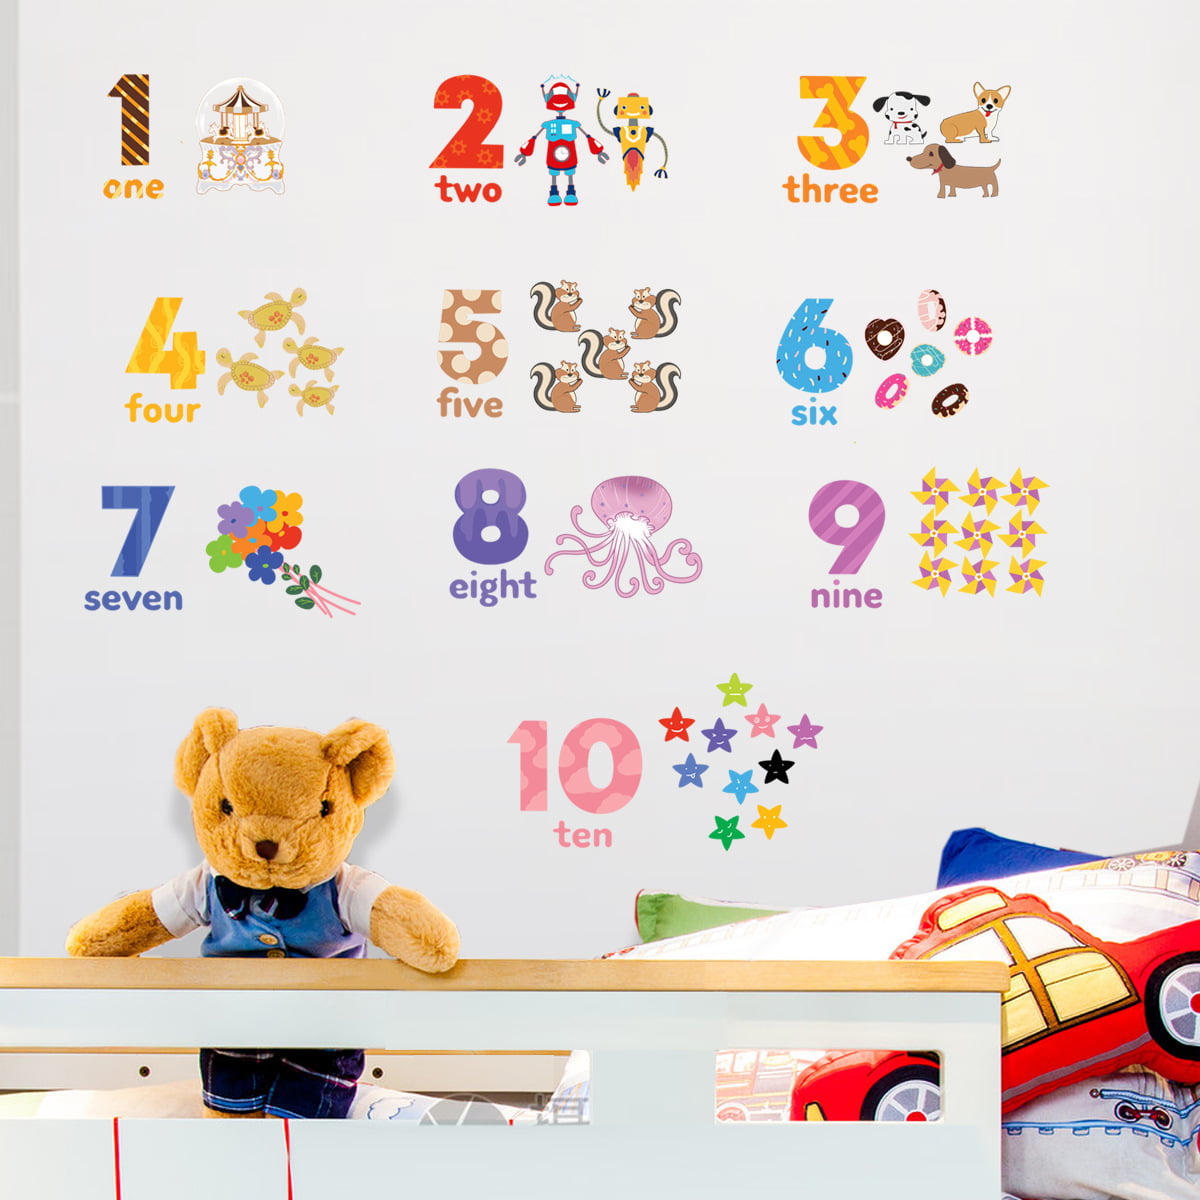 Alphabet and Numbers Wall Stickers ABC Wall Decals Pvc-free, No Odour  Reusable Peel & Stick Decals for Kids Bedroom, Nursery, Playroom 